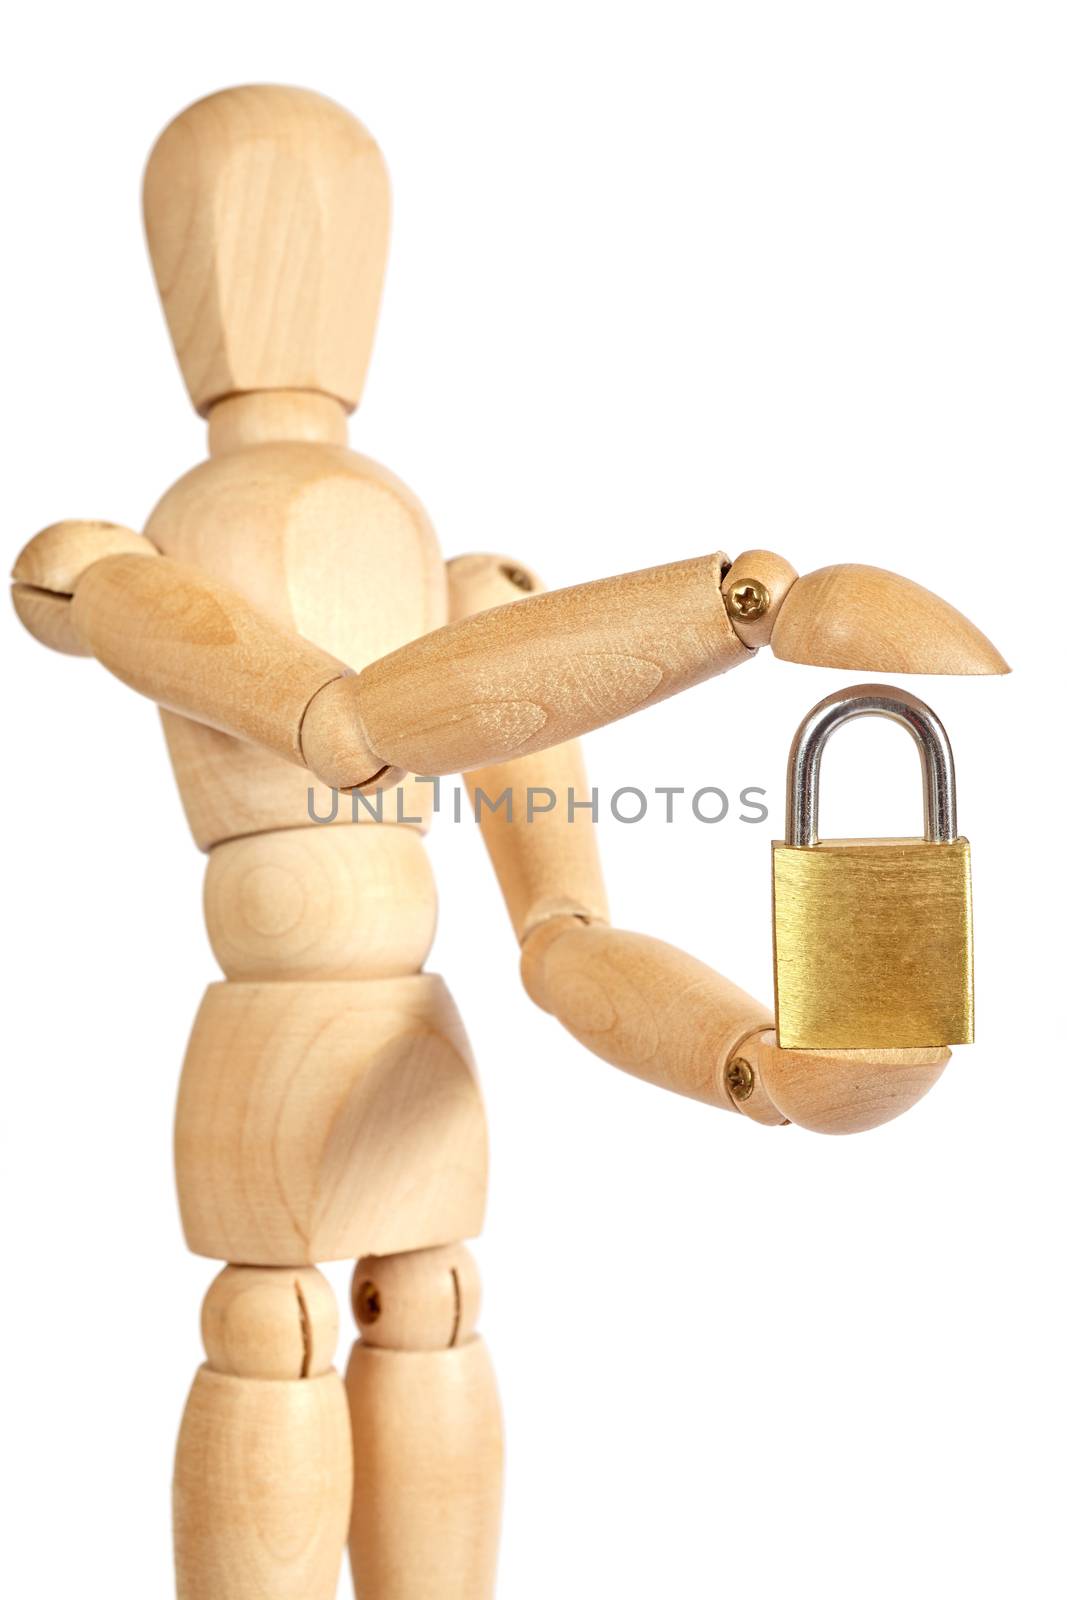 Wooden puppet and padlock by Portokalis